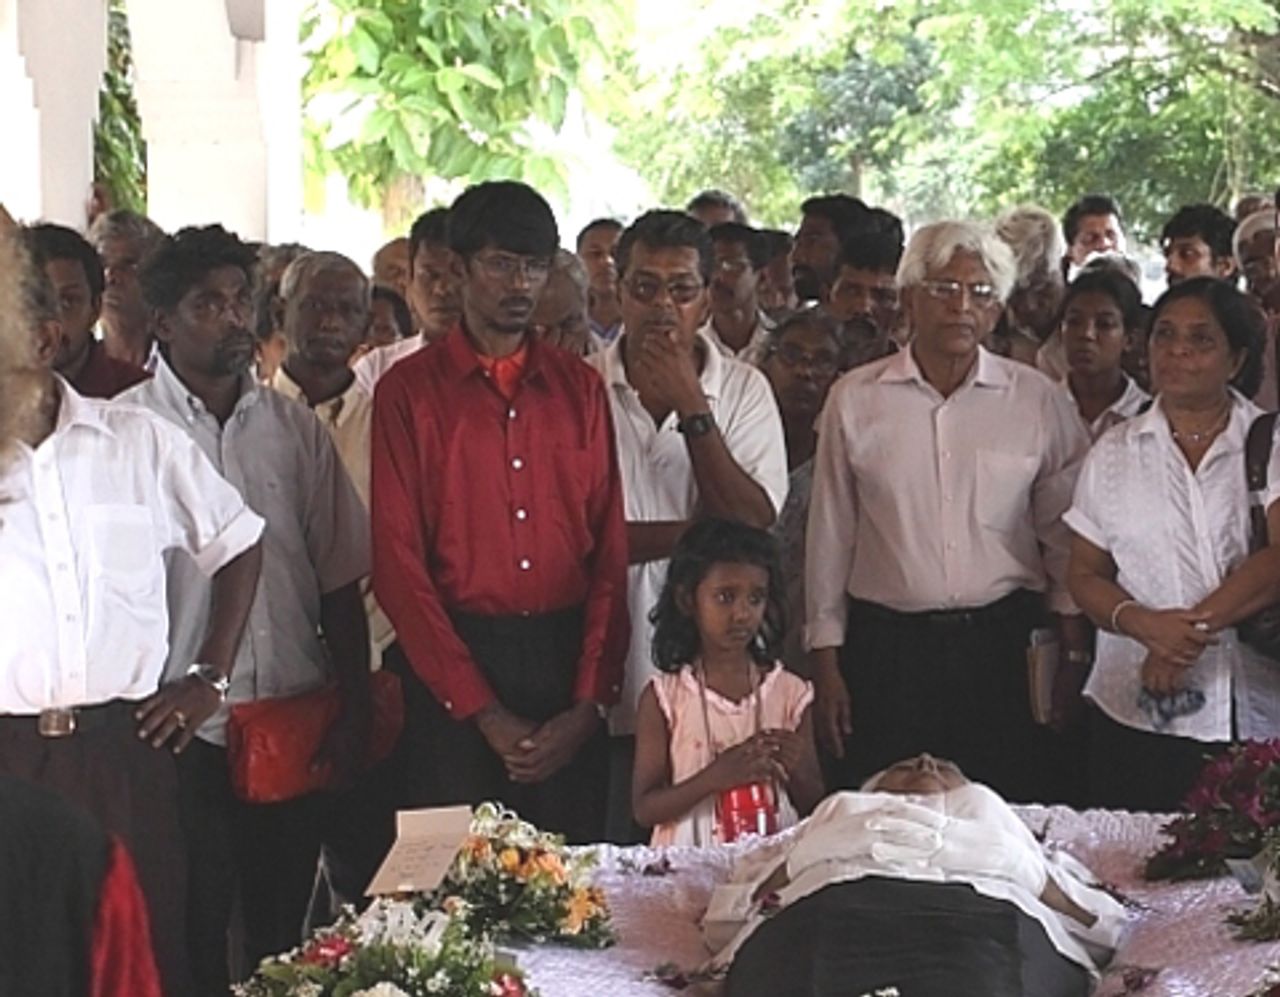 At the funeral ceremony